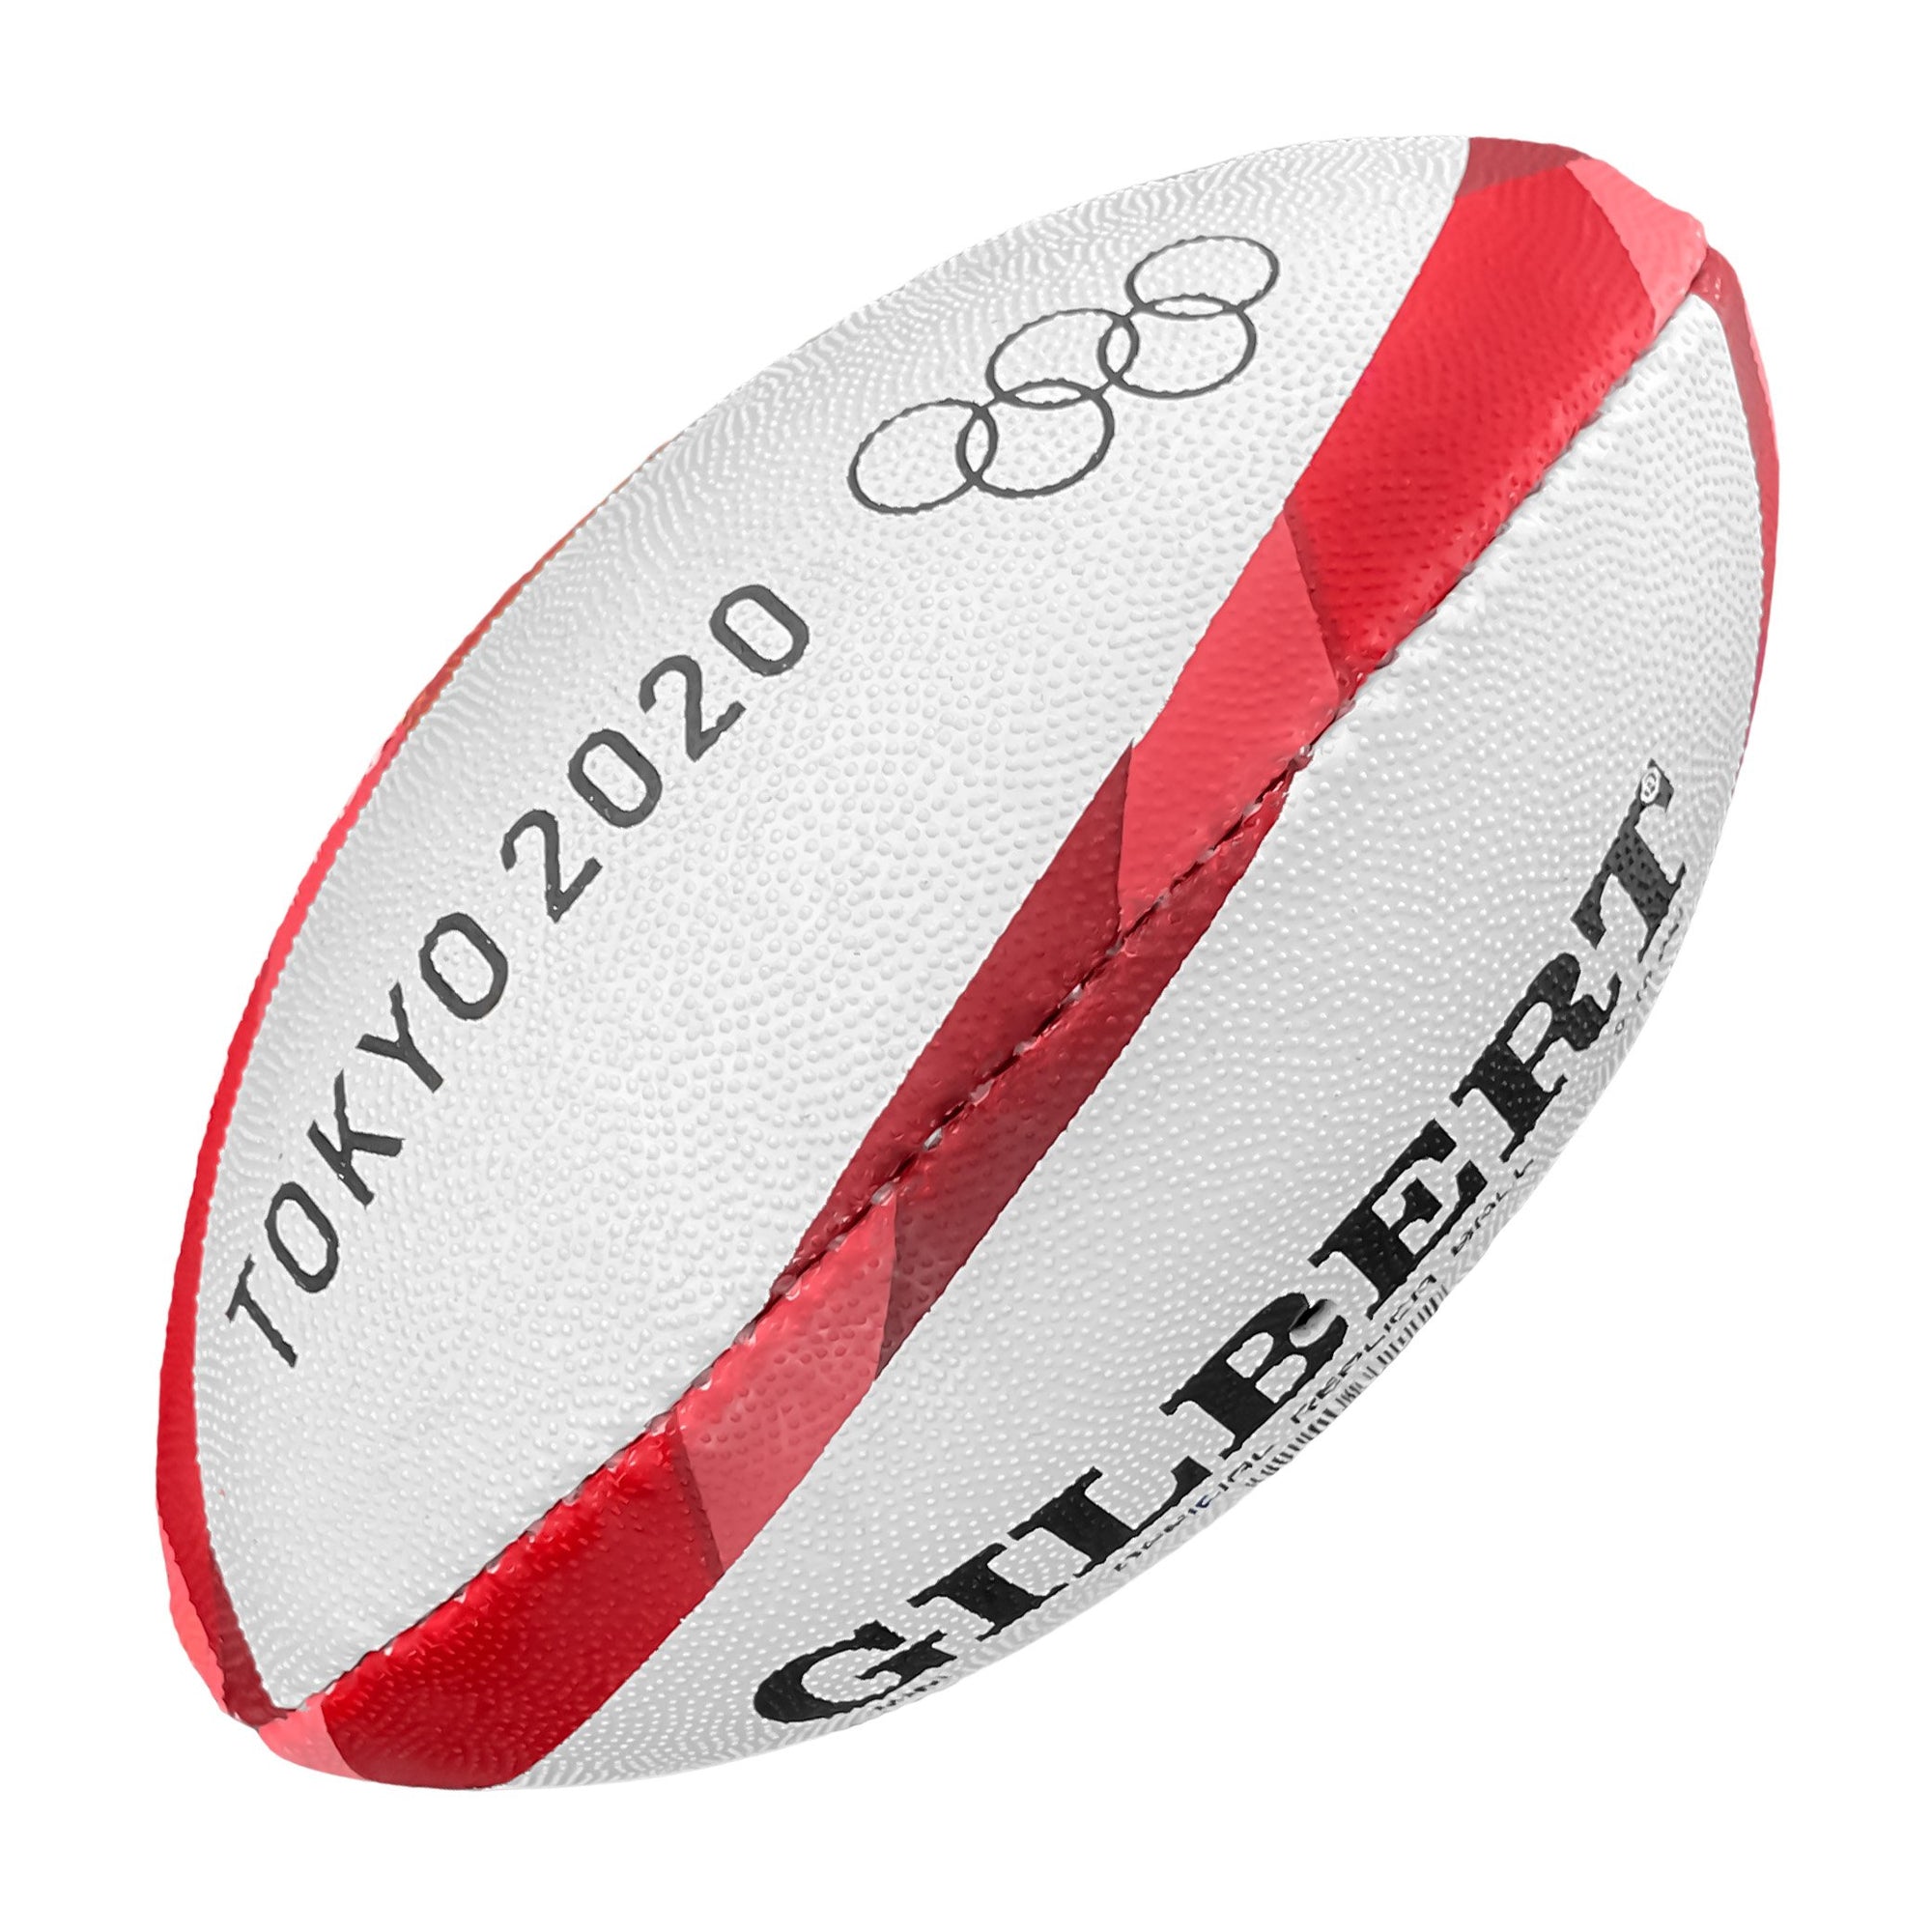 Rugby Imports Gilbert Olympics Mini Rugby Ball